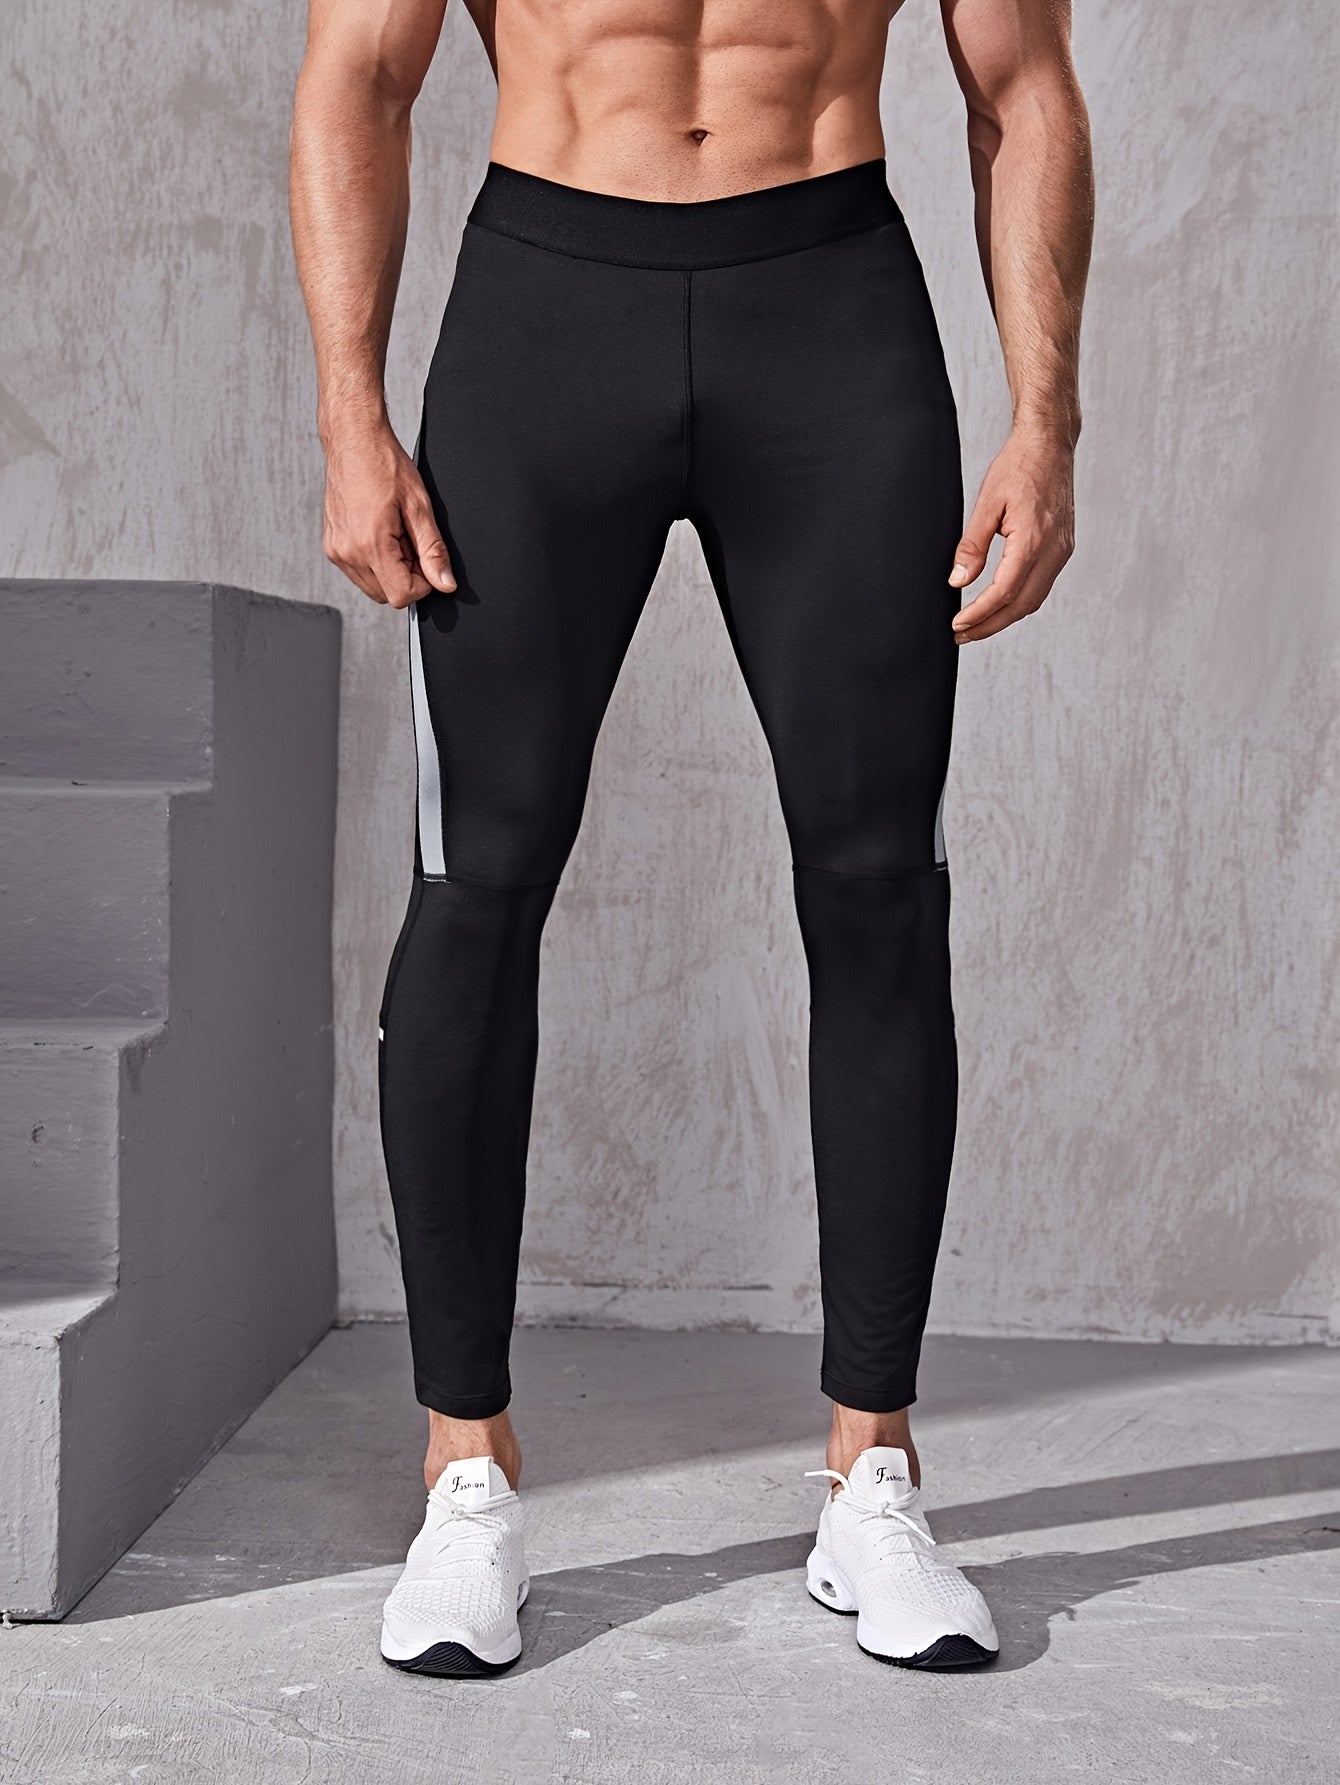 Men's Quick-drying Compression Fitness Pants, Casual High-elastic Leggings For Outdoor Gym Fitness Running